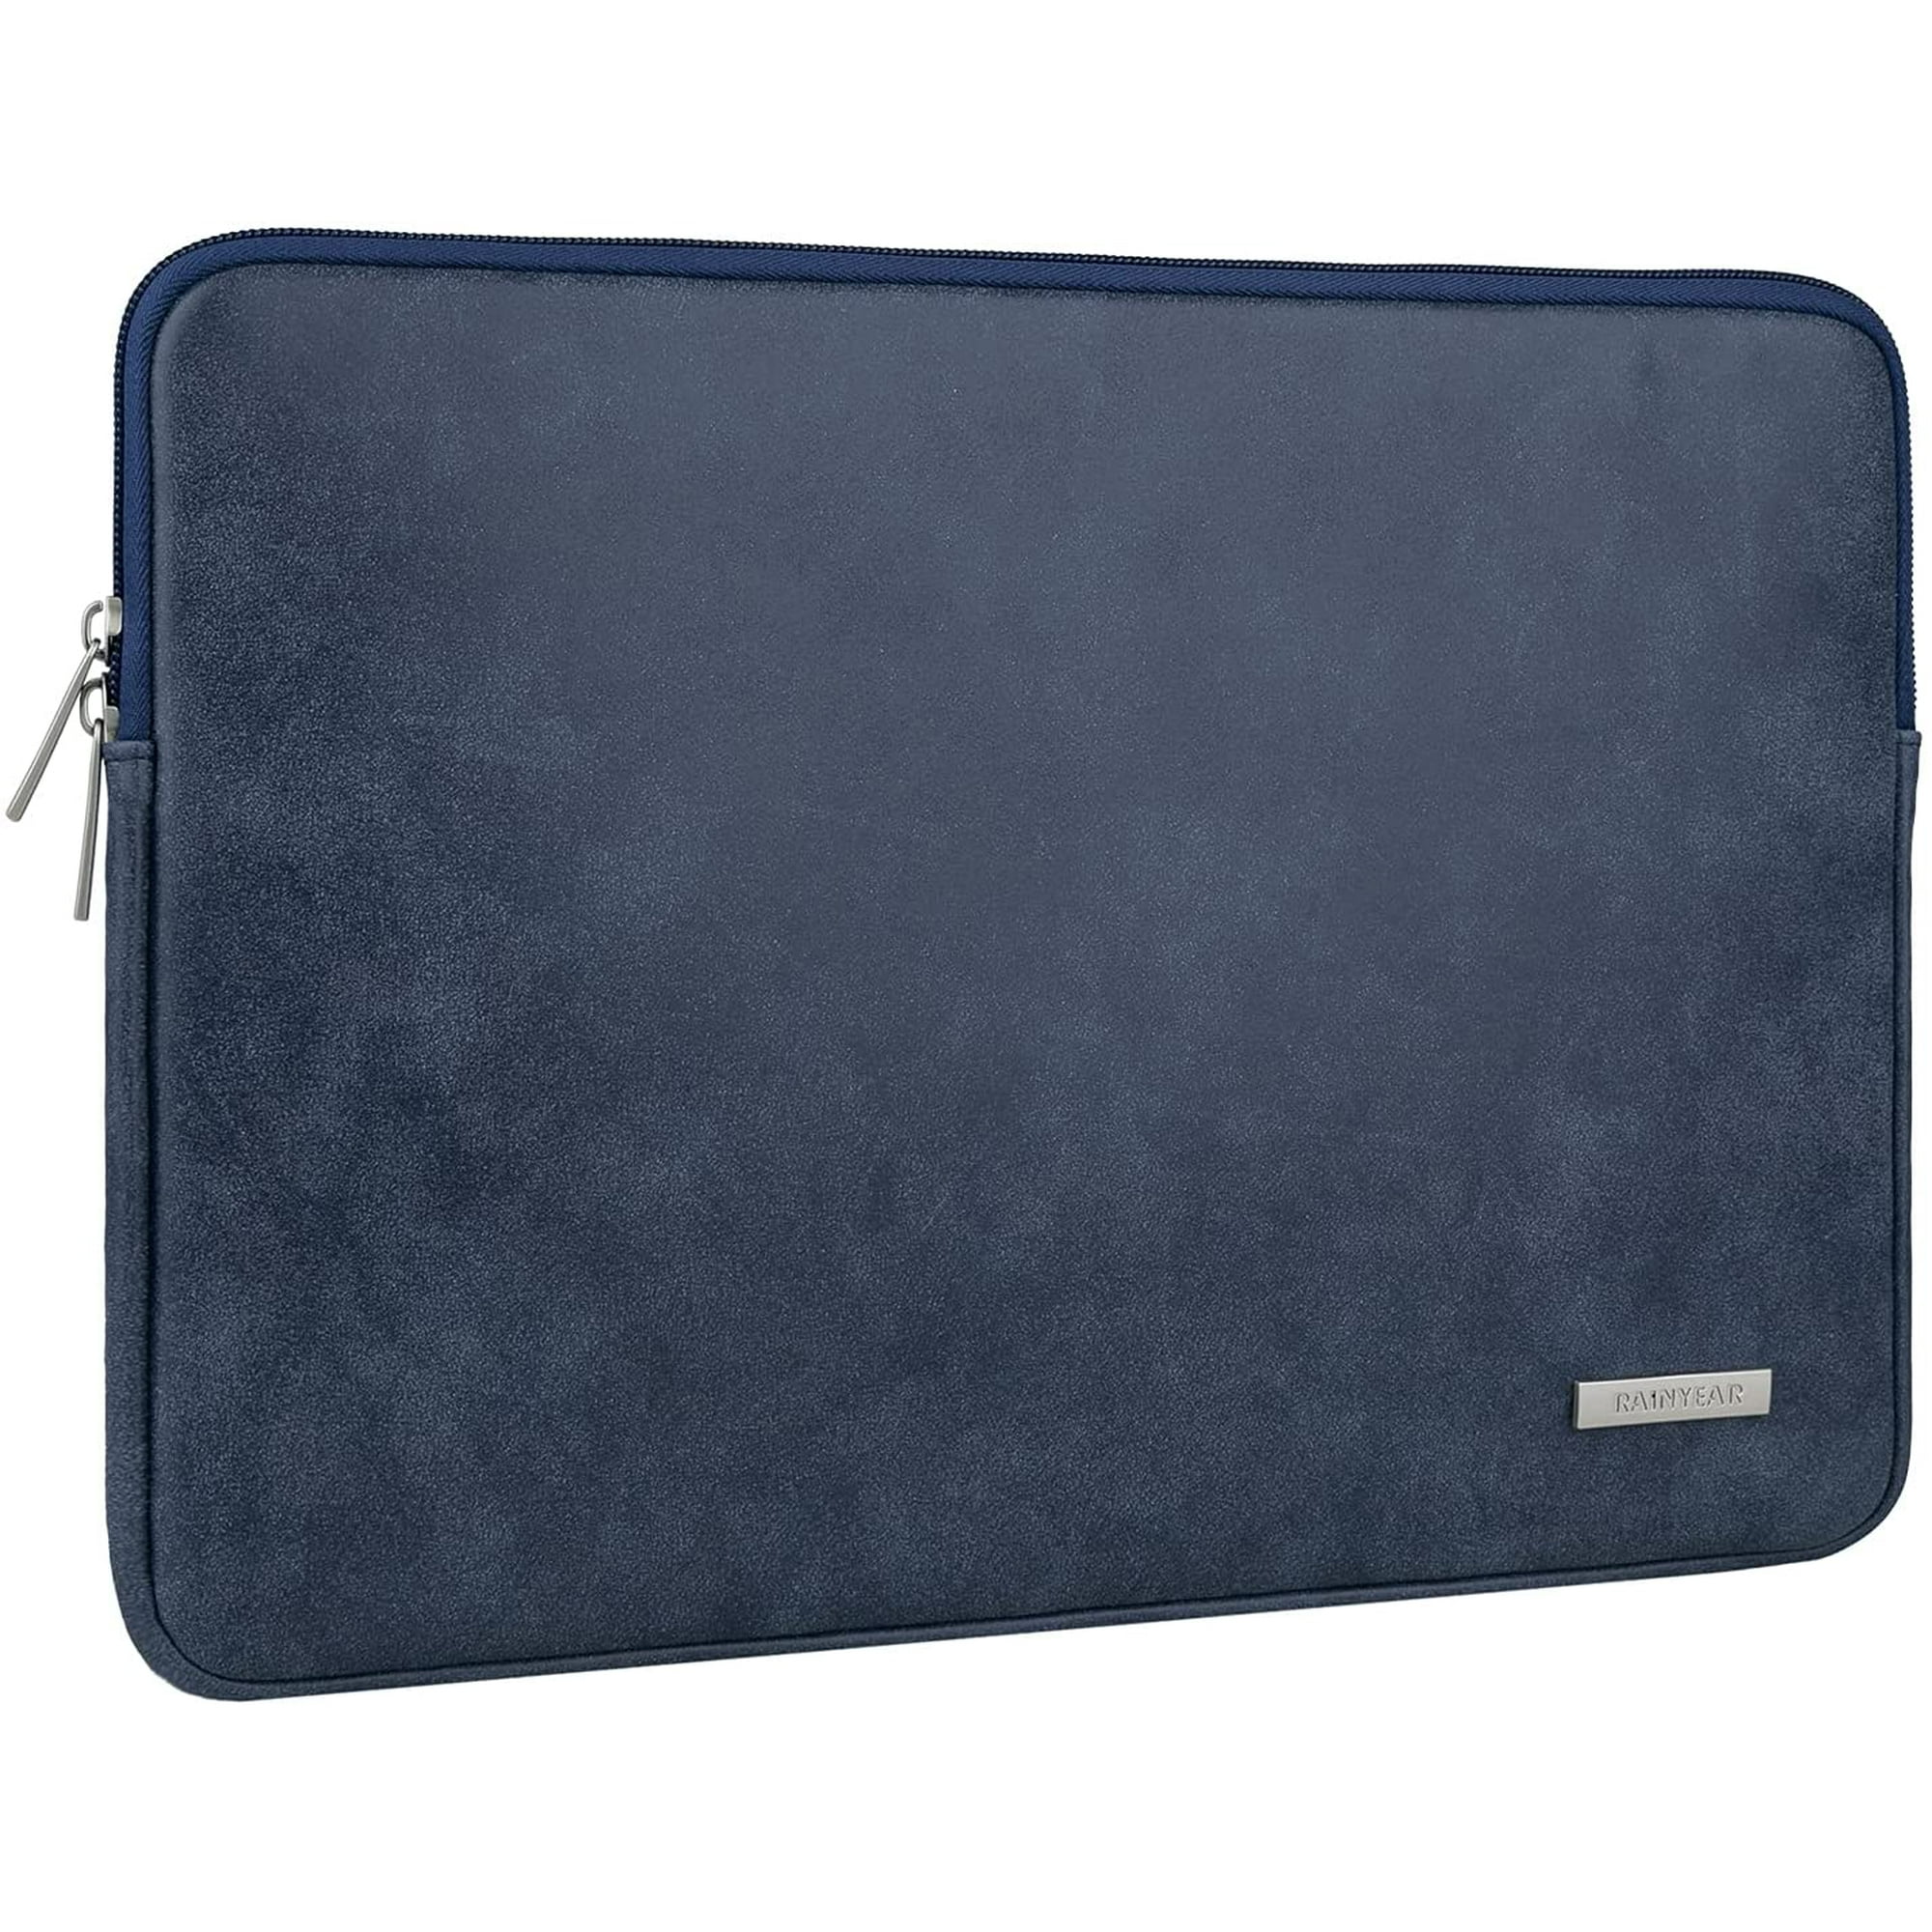 Leather Laptop Sleeve 13 inch, Leather Laptop Sleeve Case with Zipper for  13.5 inch Surface Book/ 13.3 MacBook Air/Pro